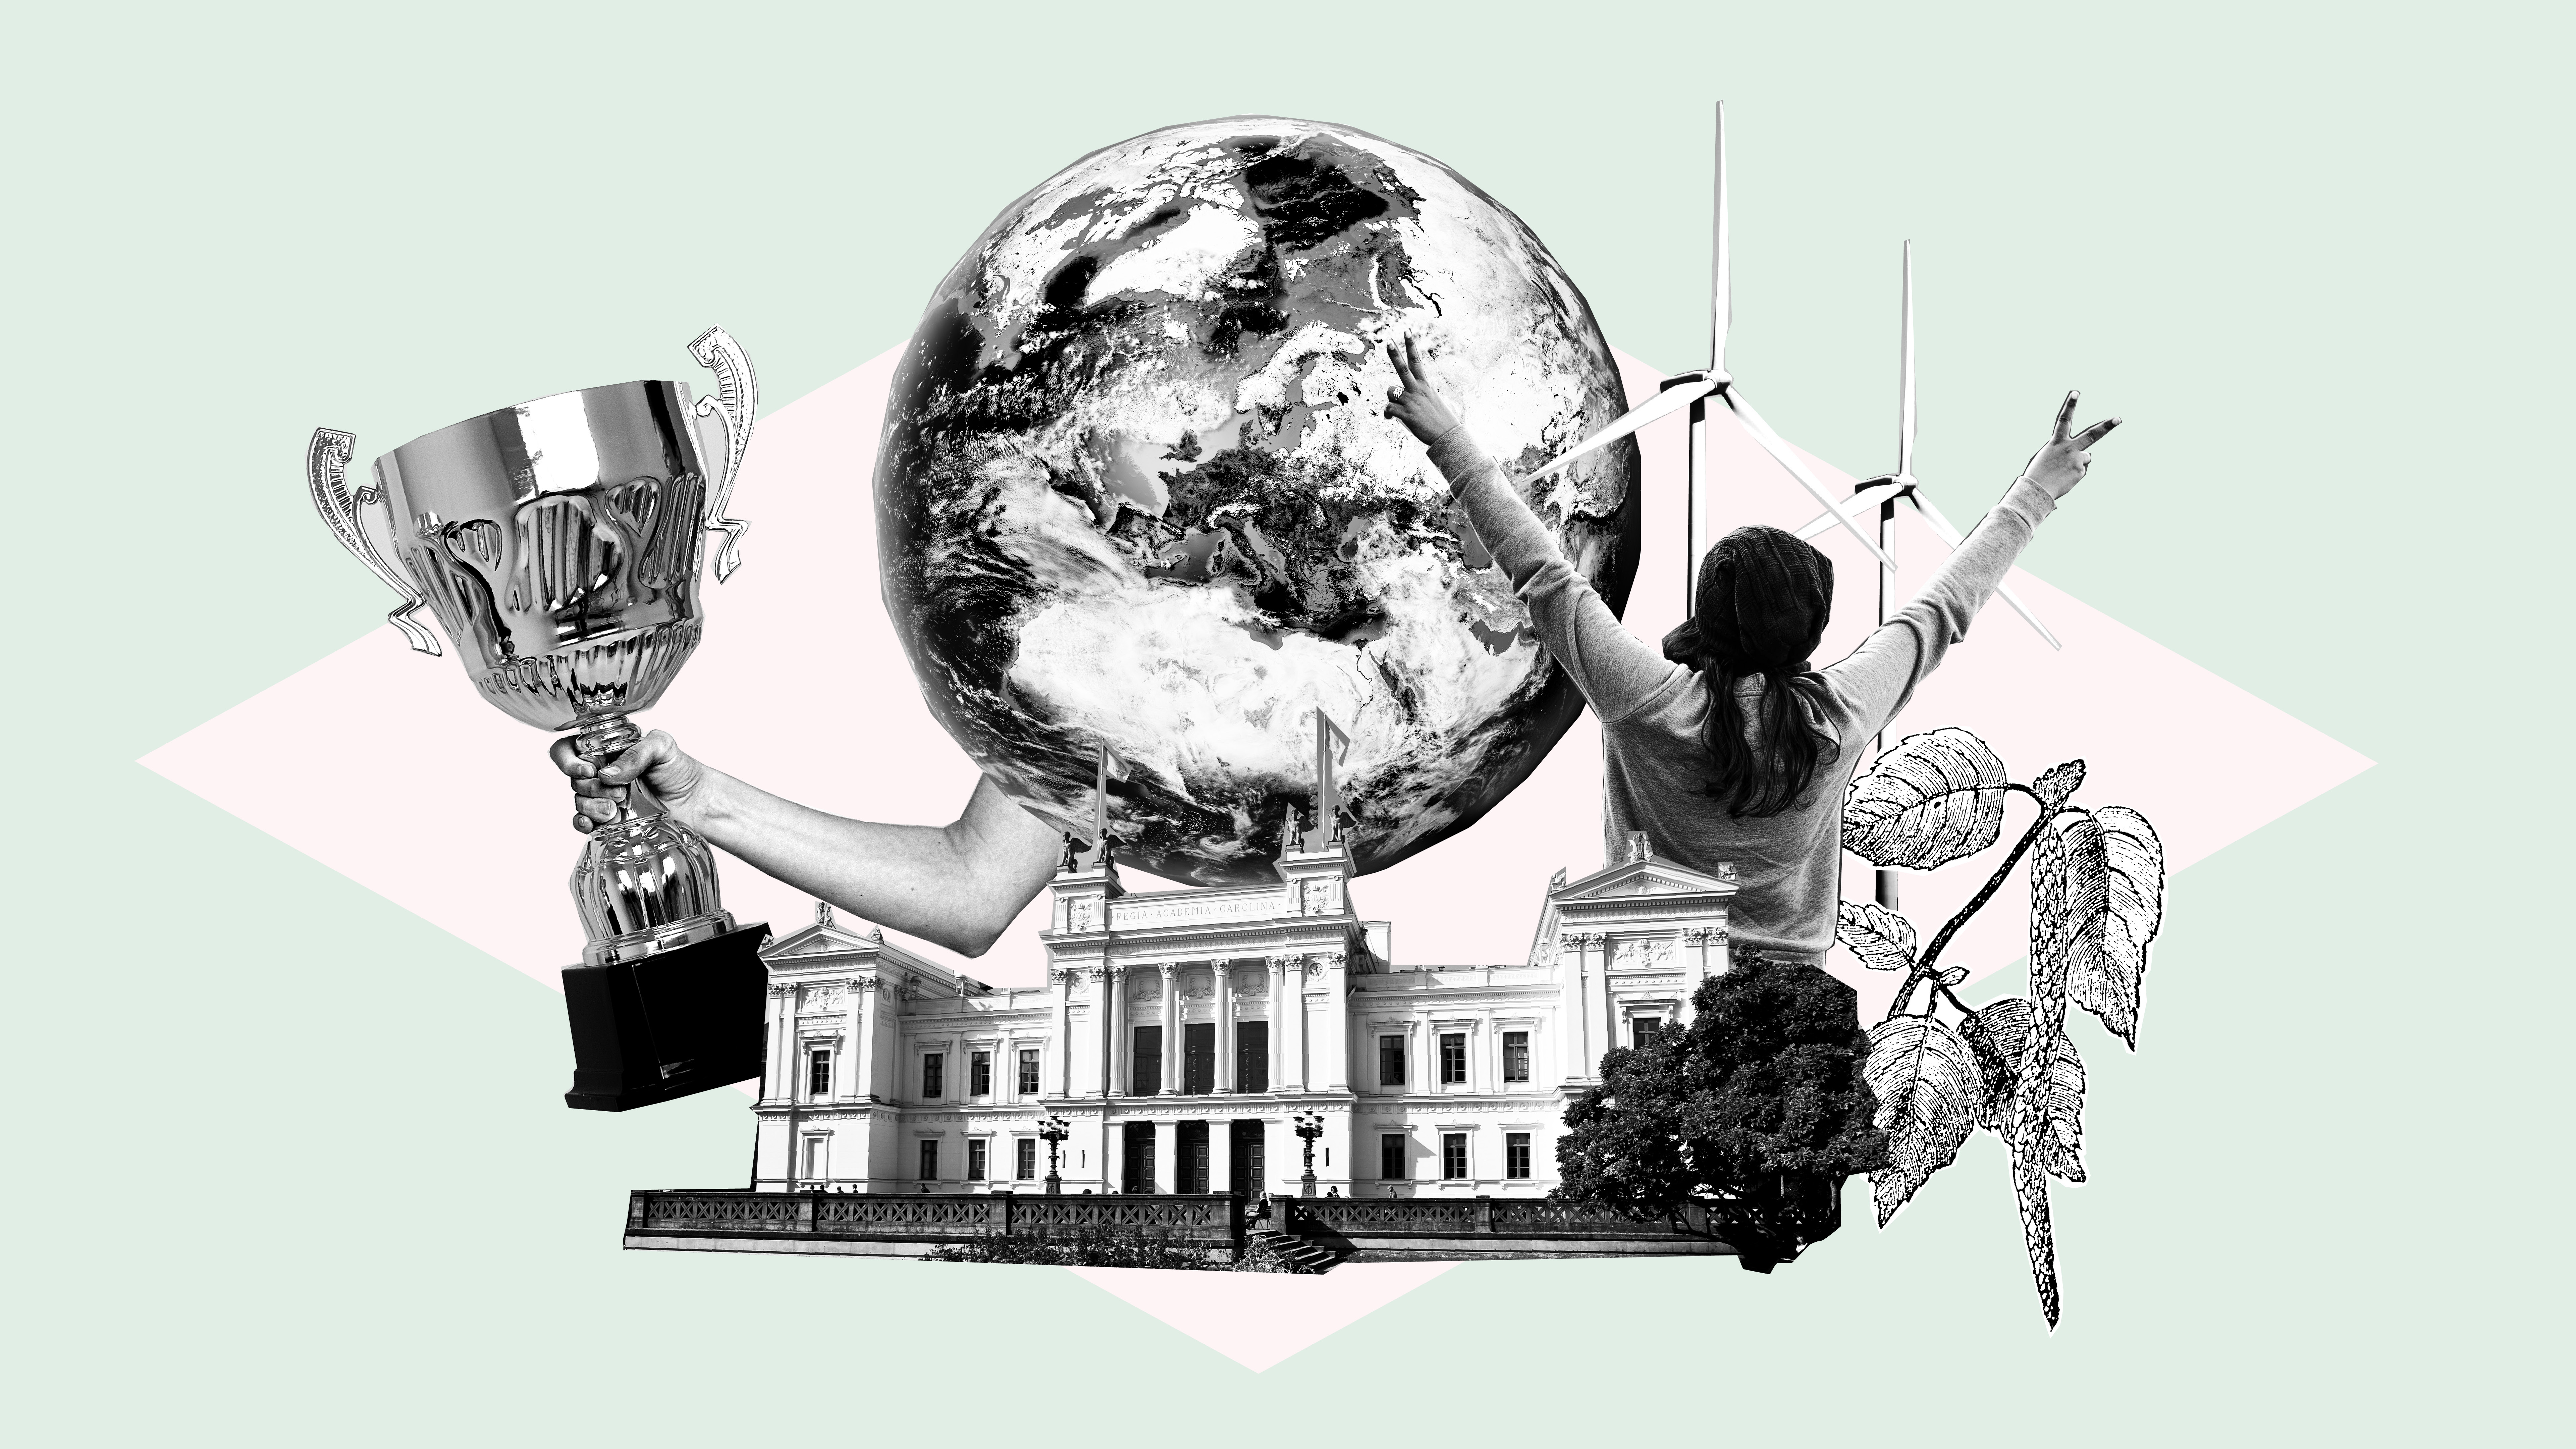 Graphic elements of Lund University building, globe, prize cup, person with winner gesture, windmills etc. Illustration.